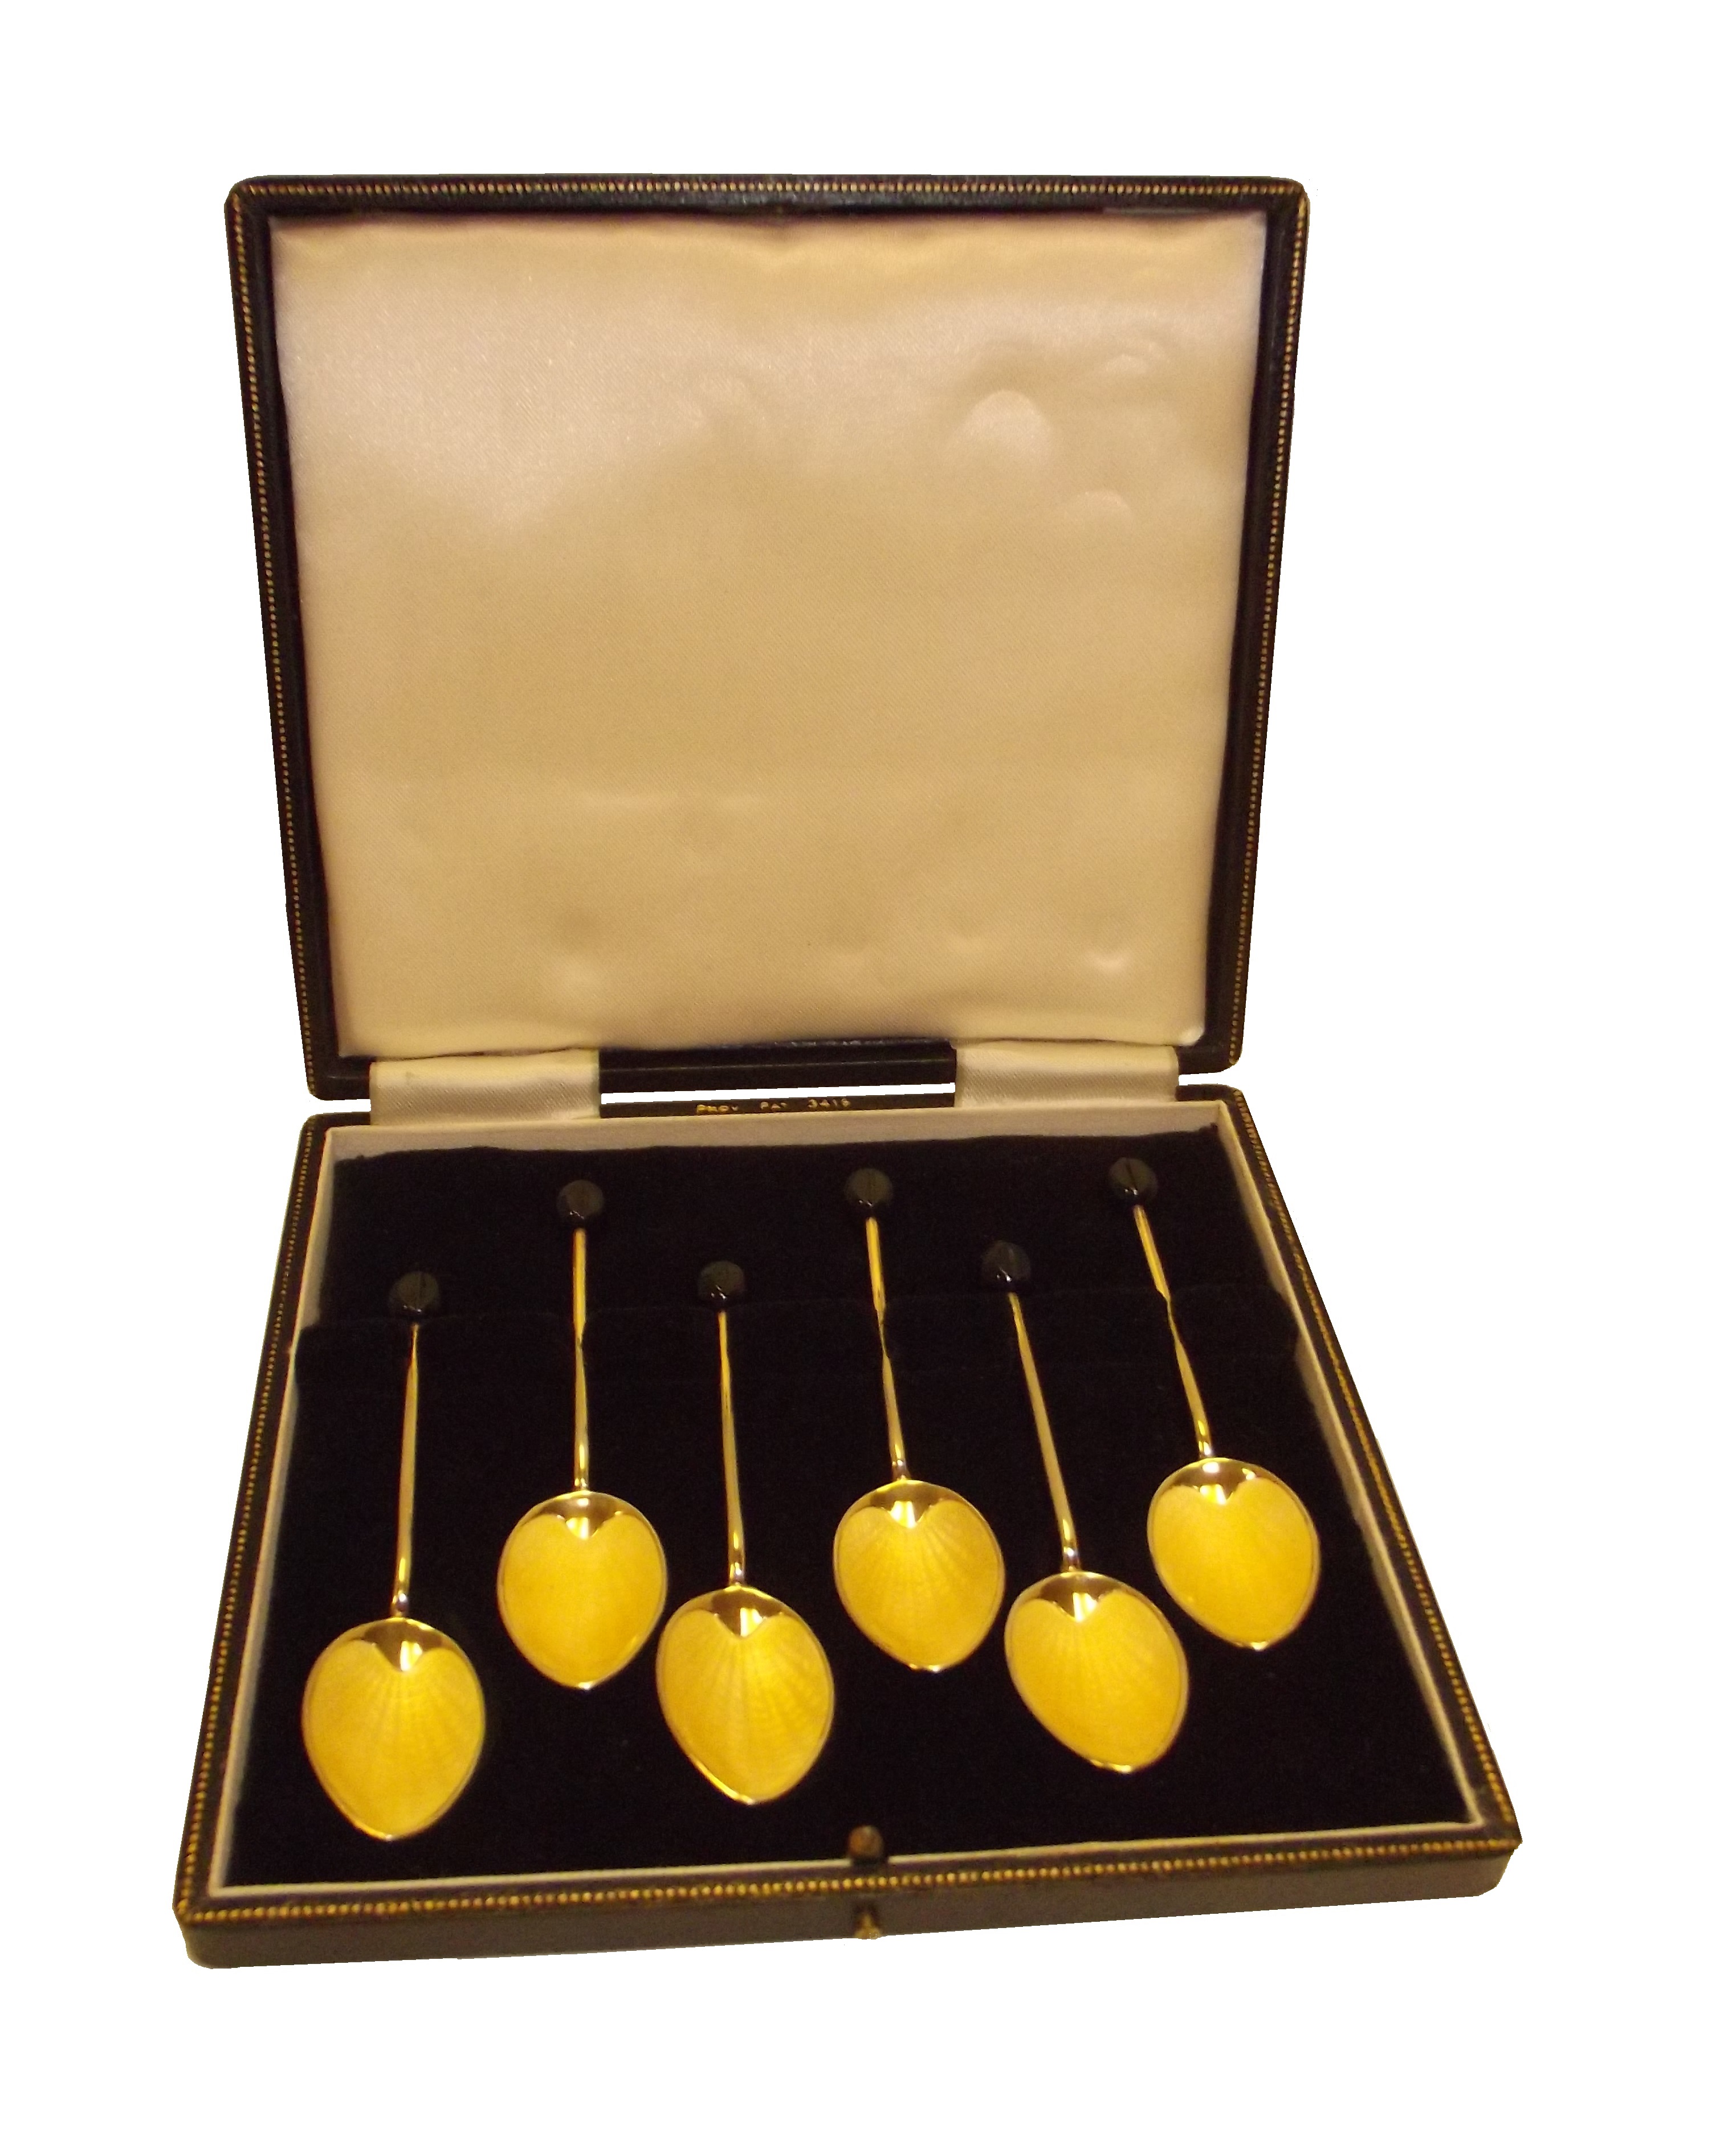 Vintage Sterling Silver Demi-Tasse Spoons with Gold Wash and Guilloche Enamel